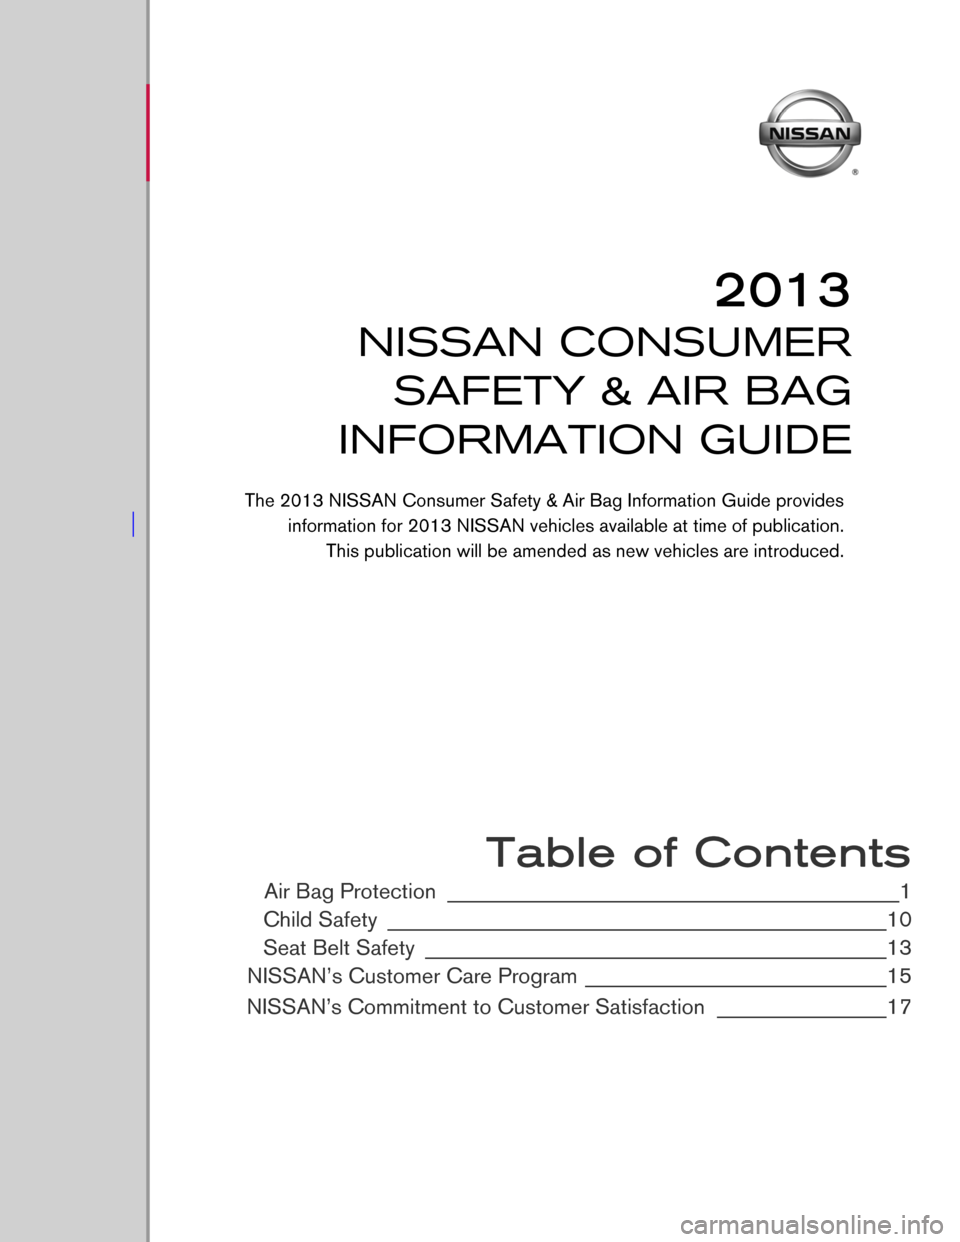 NISSAN FRONTIER 2013 D40 / 2.G Consumer Safety Air Bag Information Guide  
 
 
 
 
 
 
 
 
 
 
 
 
 
 
 
 
 
 
 
 
 
 
 Table of Contents
Air Bag Protection ________________________________________________1
Child Safety
 ____________________________________________________